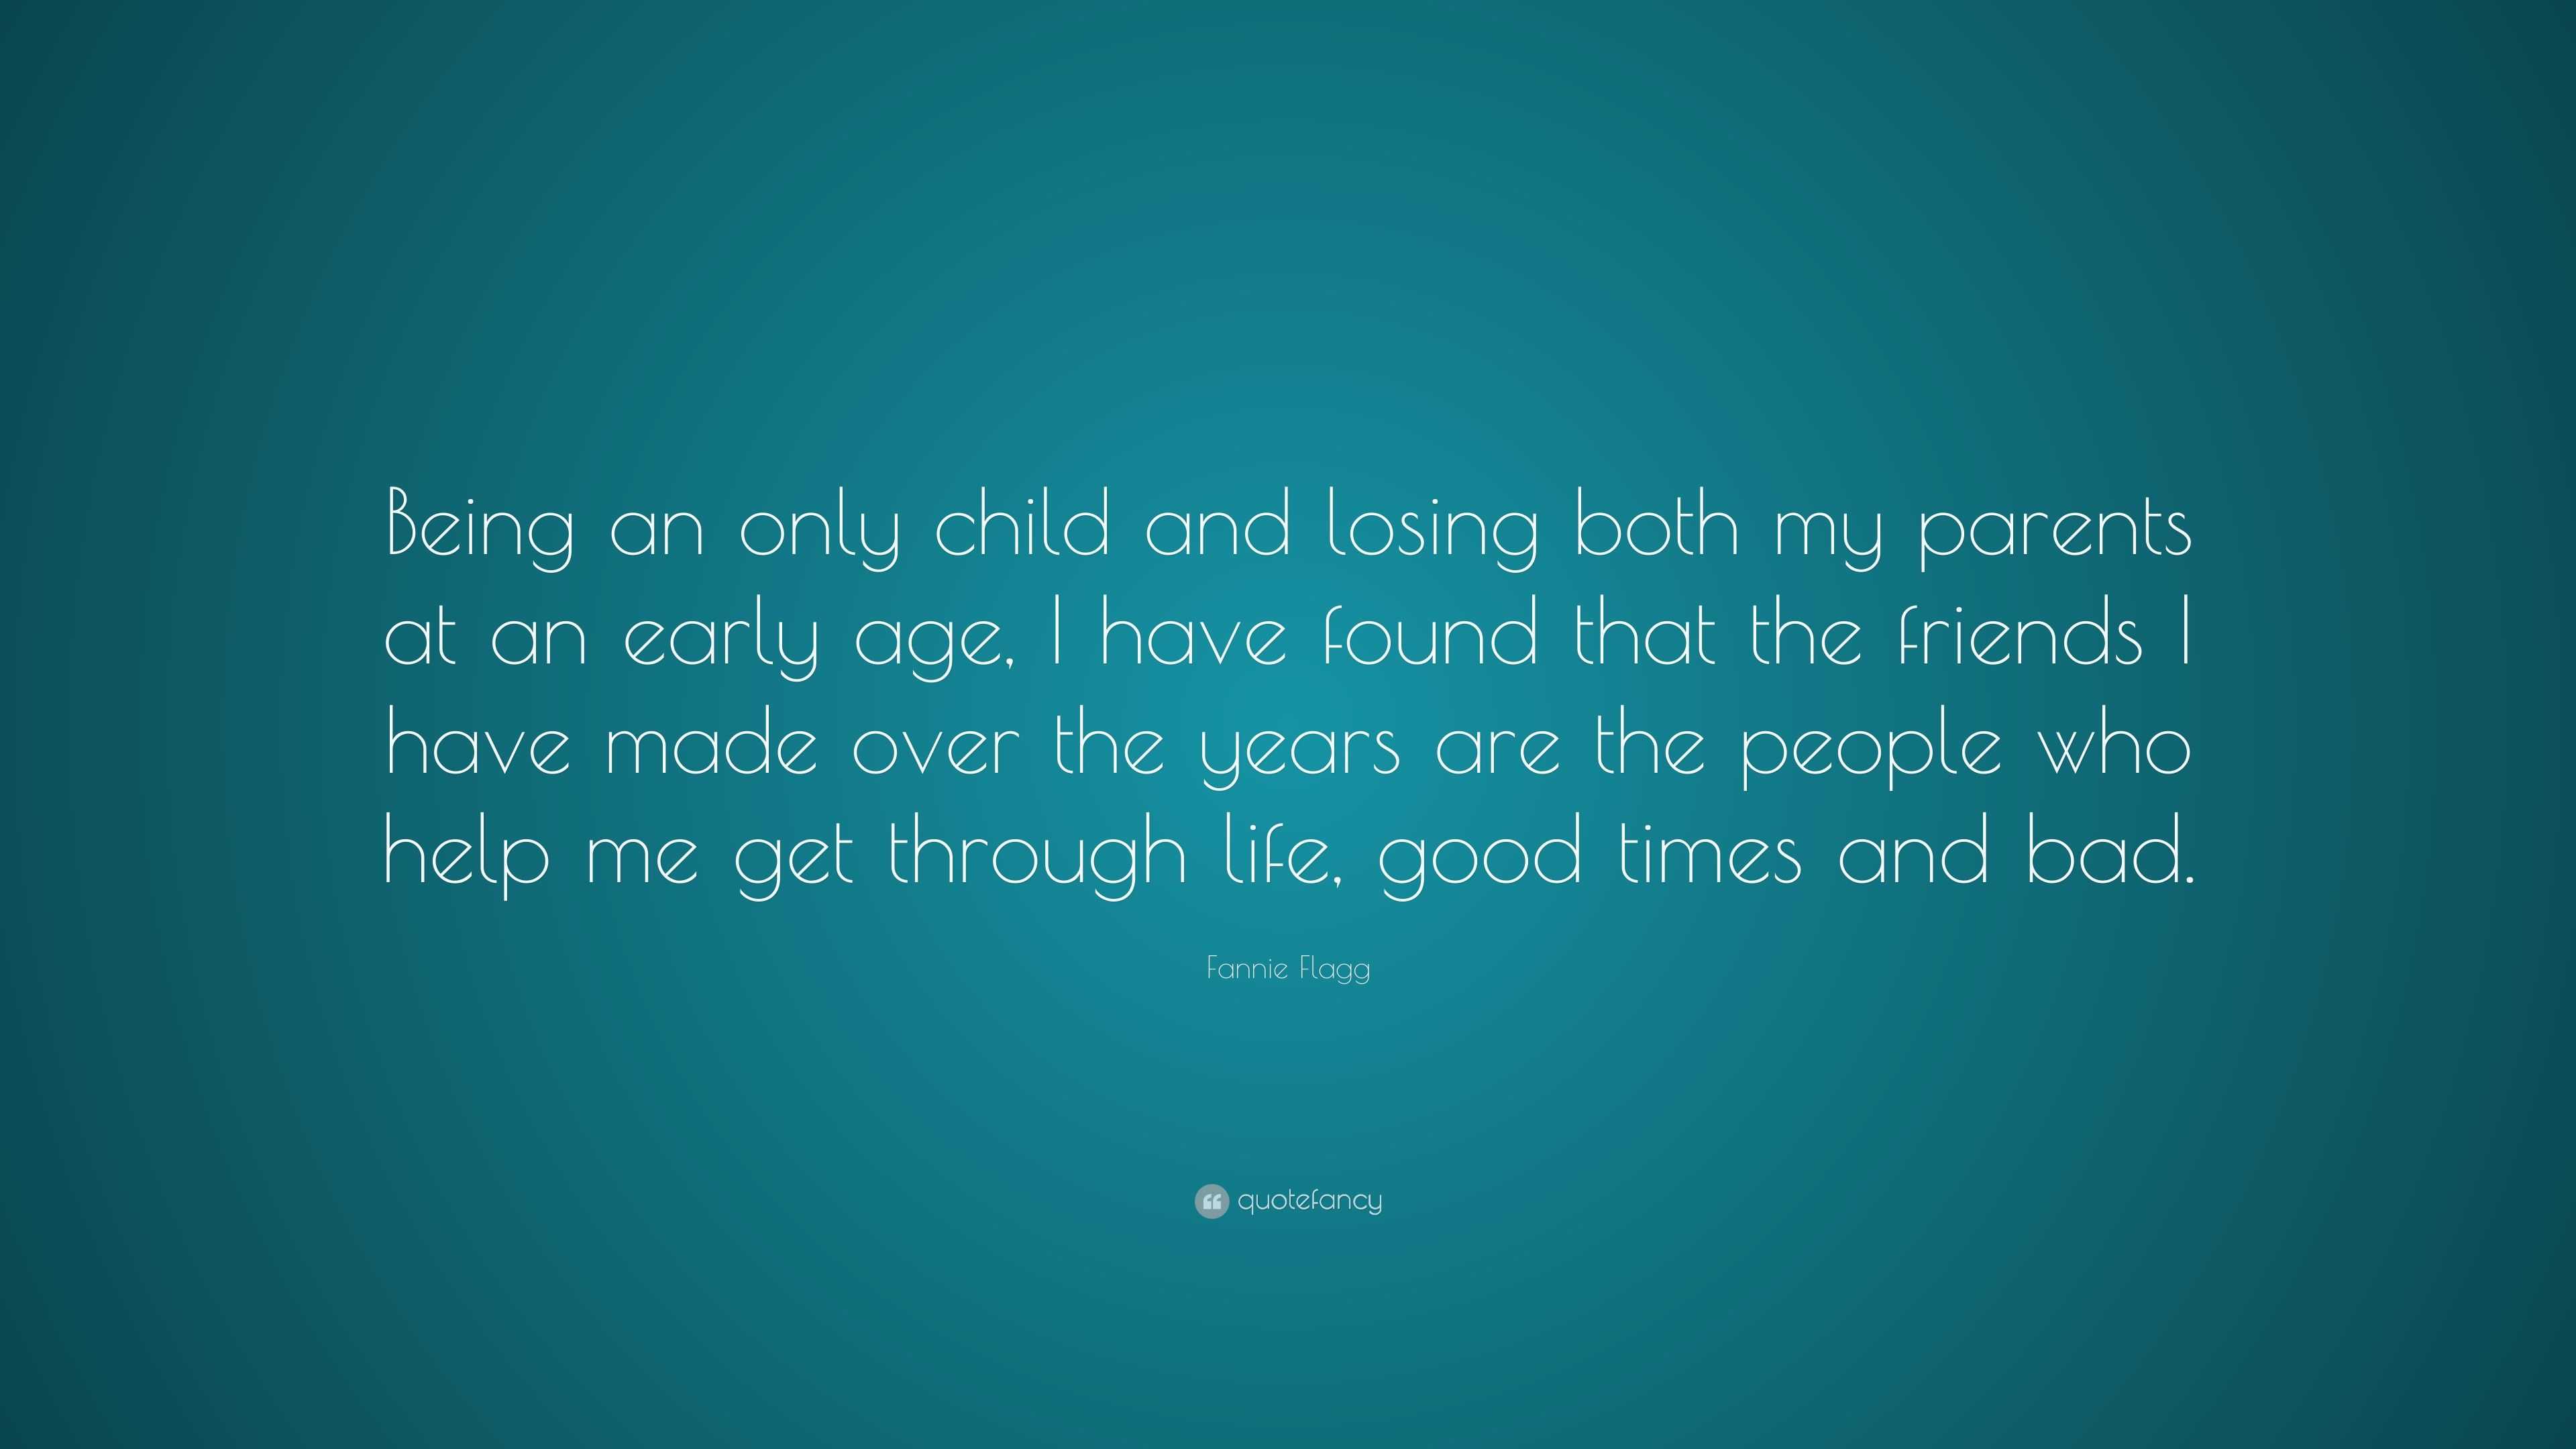 Fannie Flagg Quote: “Being An Only Child And Losing Both My Parents At An Early Age, I Have Found That The Friends I Have Made Over The Years...”